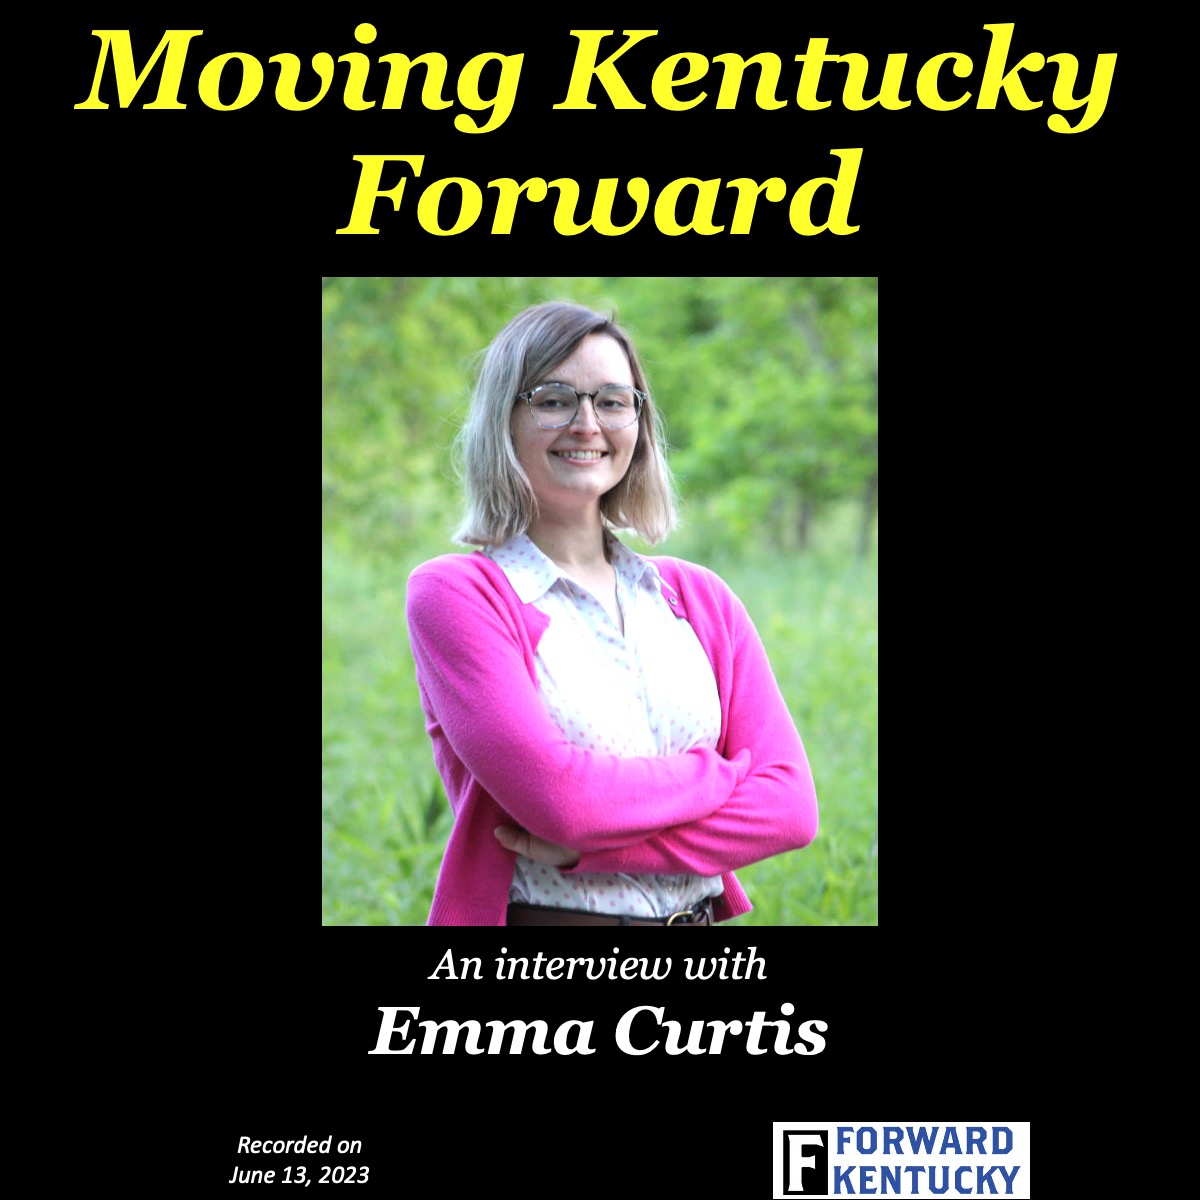 An interview with Emma Curtis